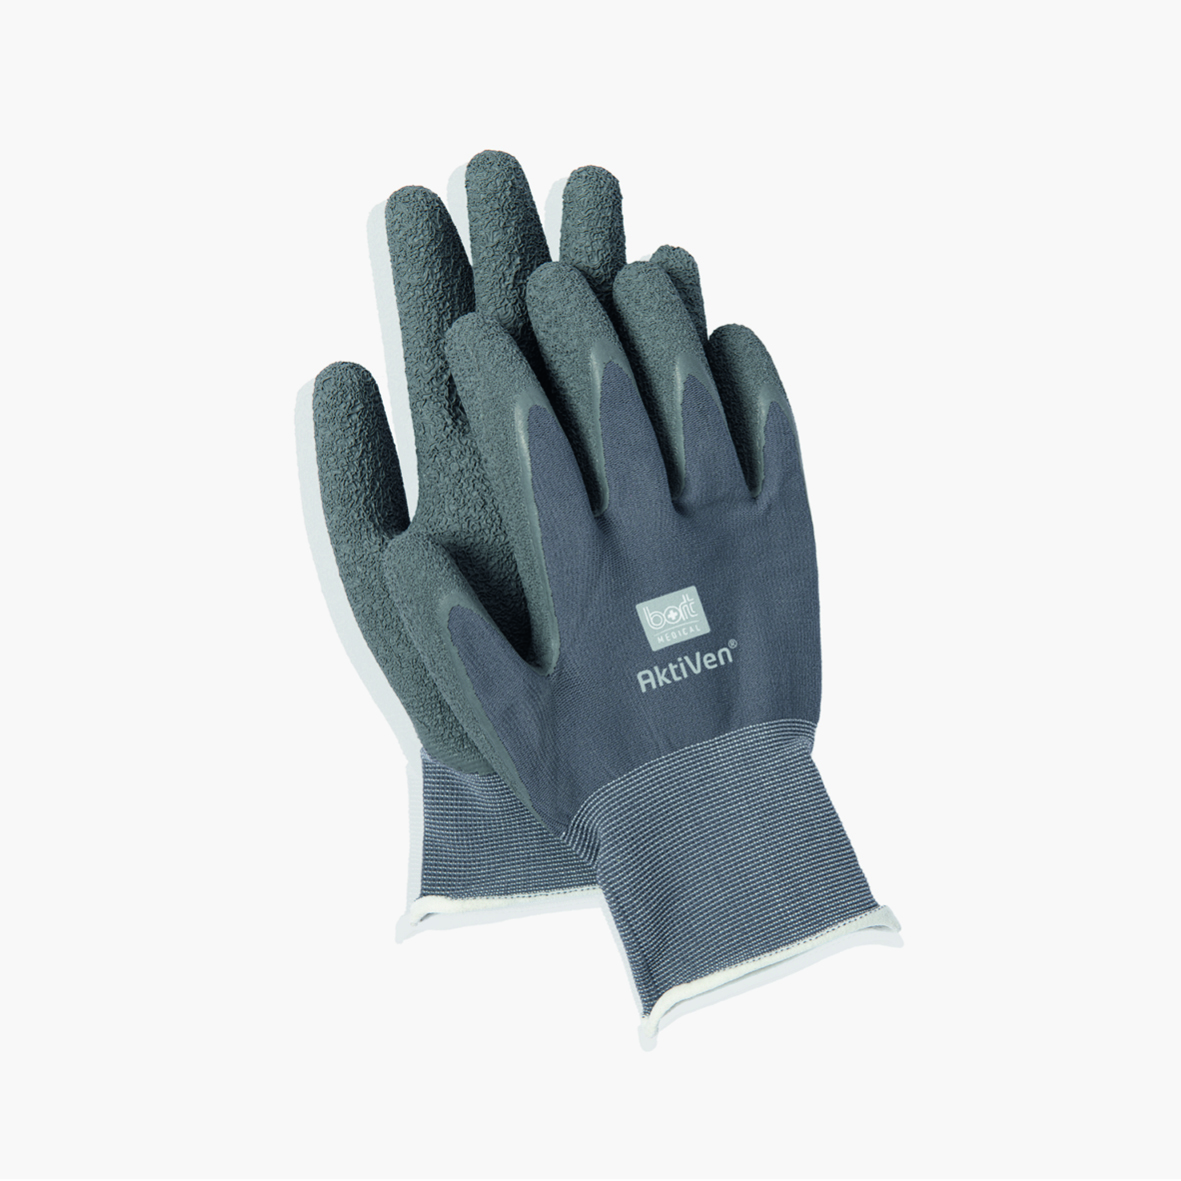 BORT AktiVen® Special Gloves for medical compression stockings